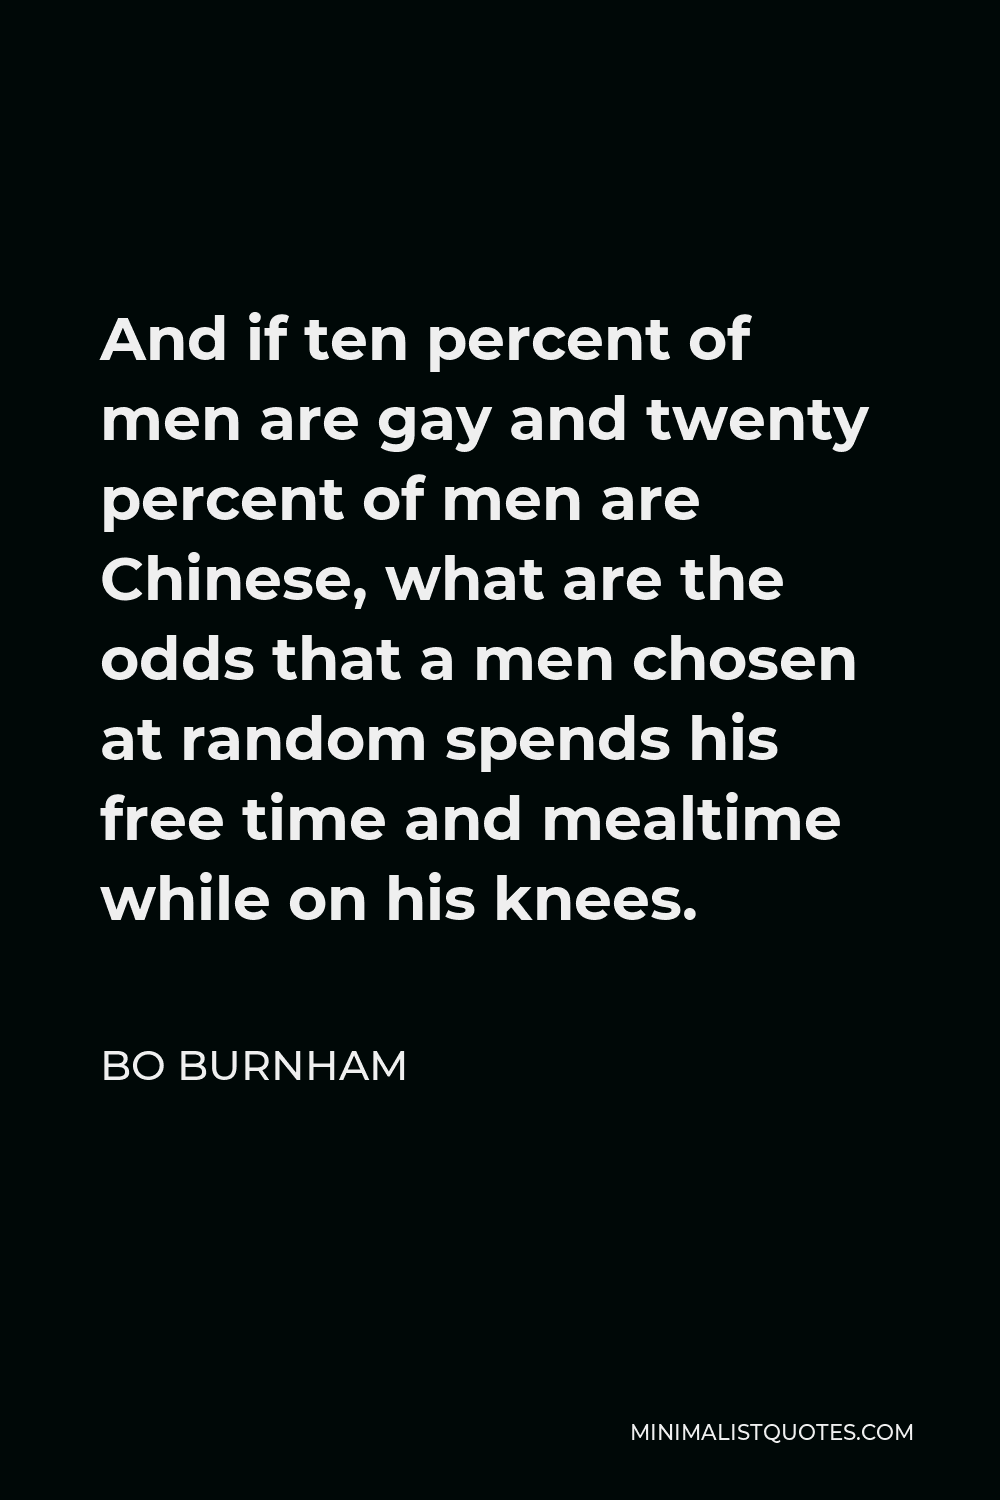 Bo Burnham Quote - And if ten percent of men are gay and twenty percent of men are Chinese, what are the odds that a men chosen at random spends his free time and mealtime while on his knees.